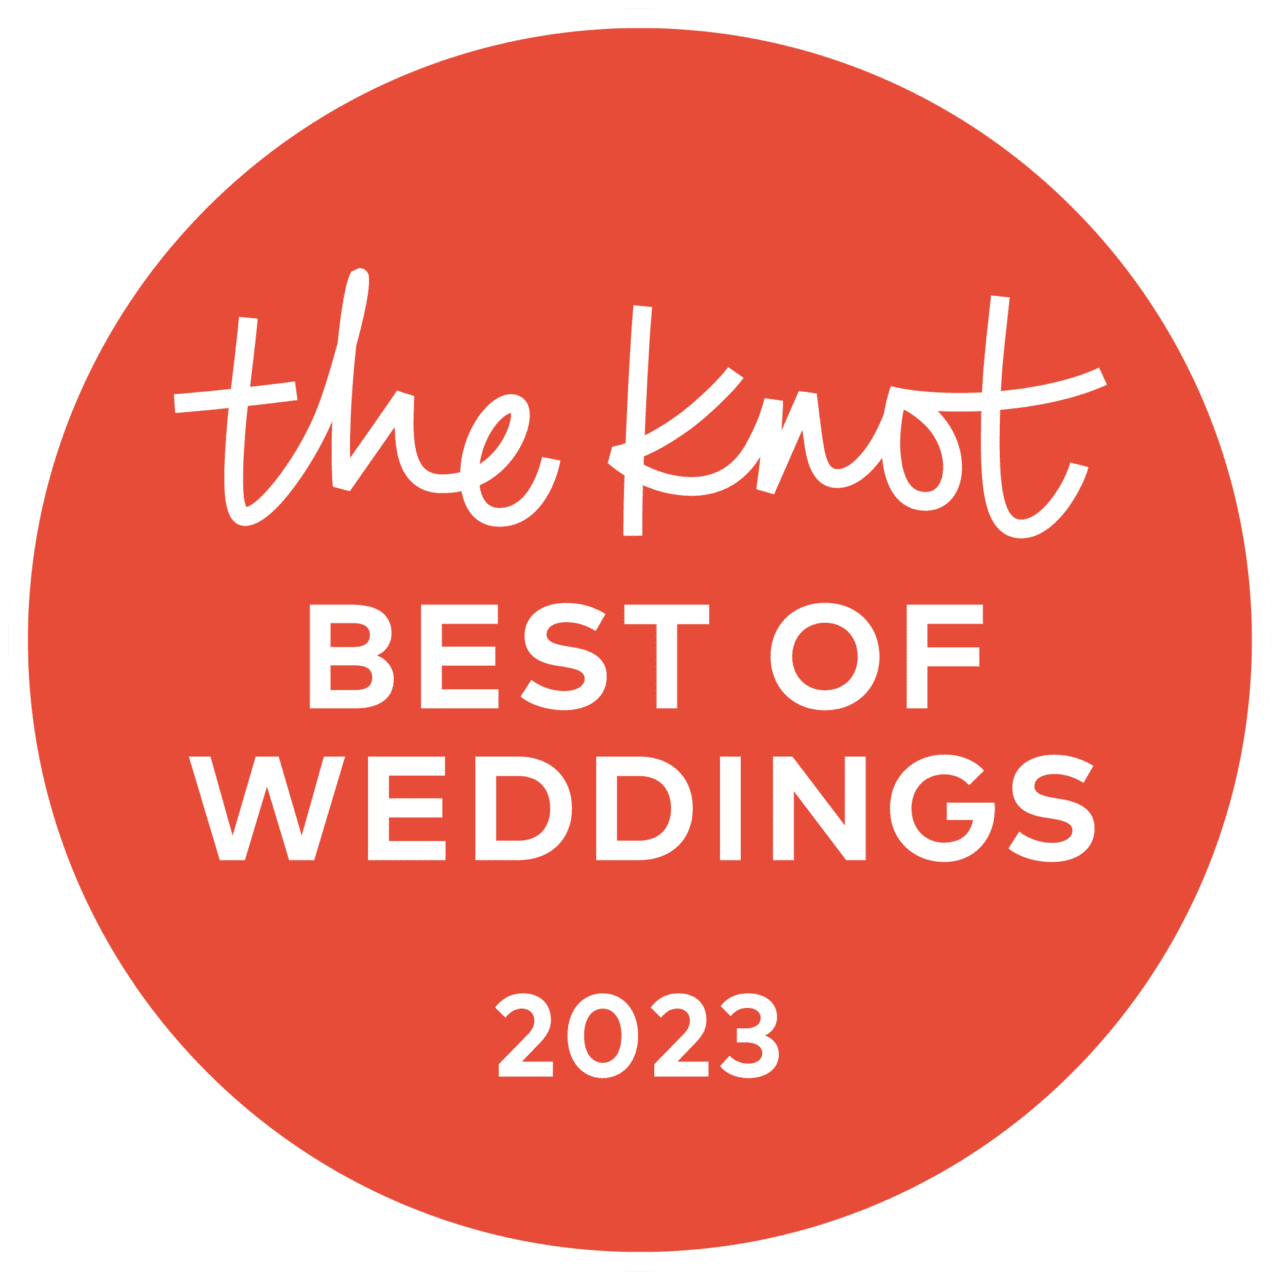 Complete Weddings + Events Louisiana Named Winner Of The Knot Best Of Weddings 2023